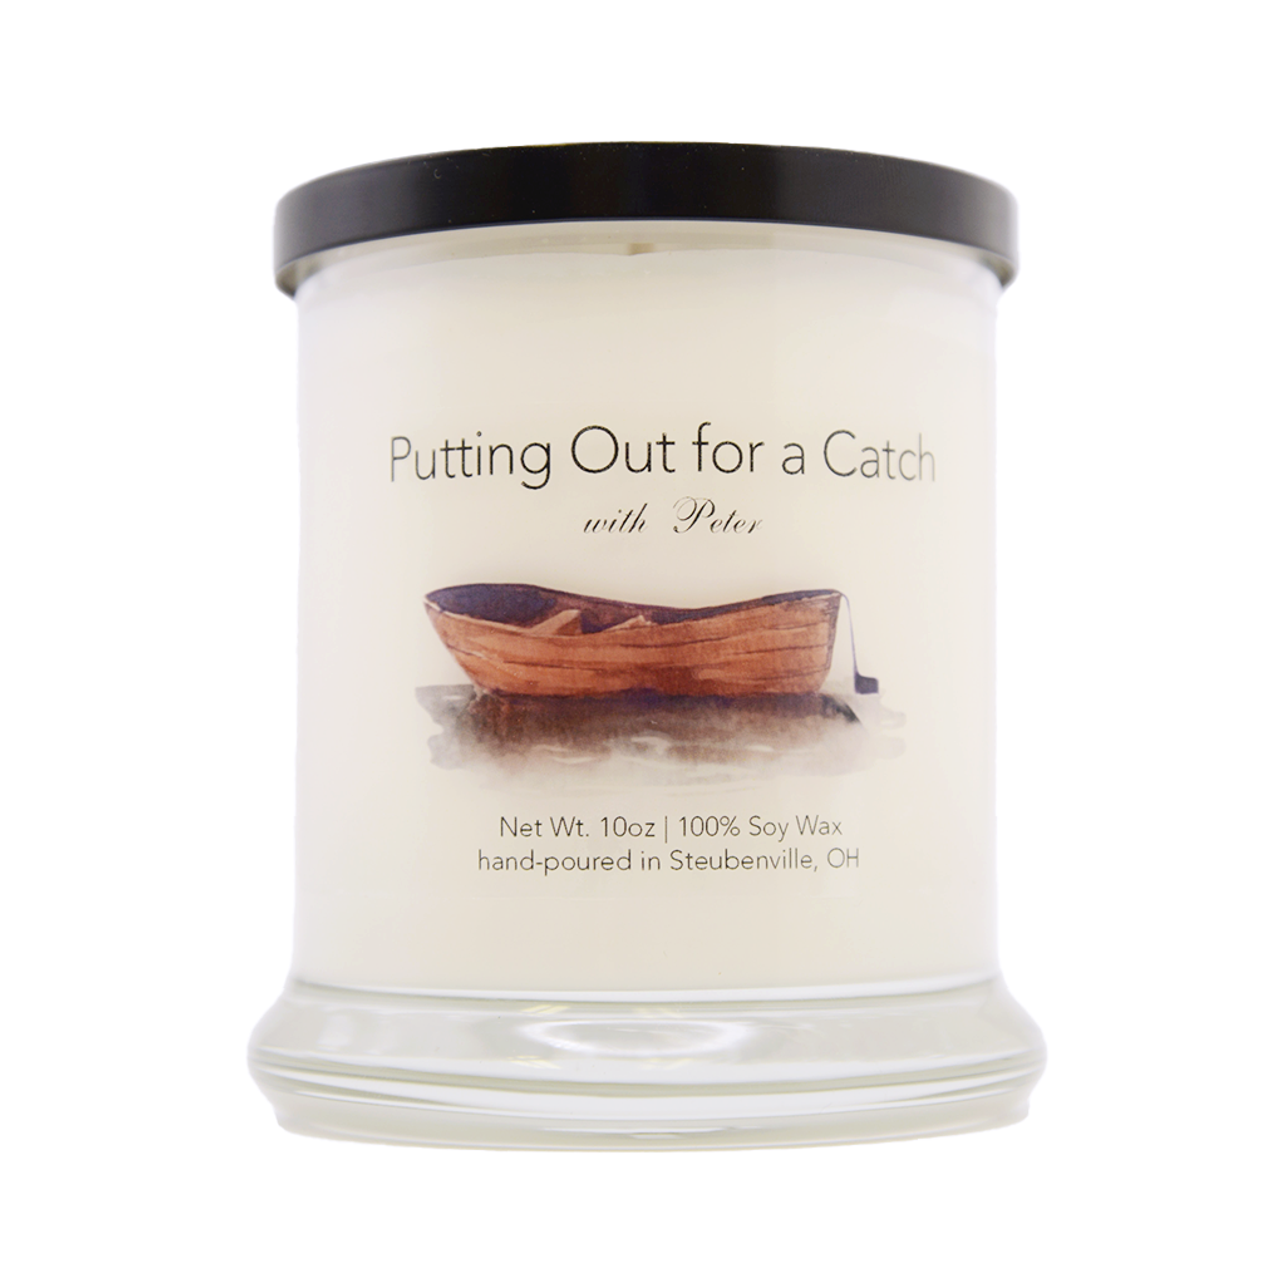 Putting Out for a Catch with Peter Marine, Waterflorals, Musk & Cedarwood Soy Candle